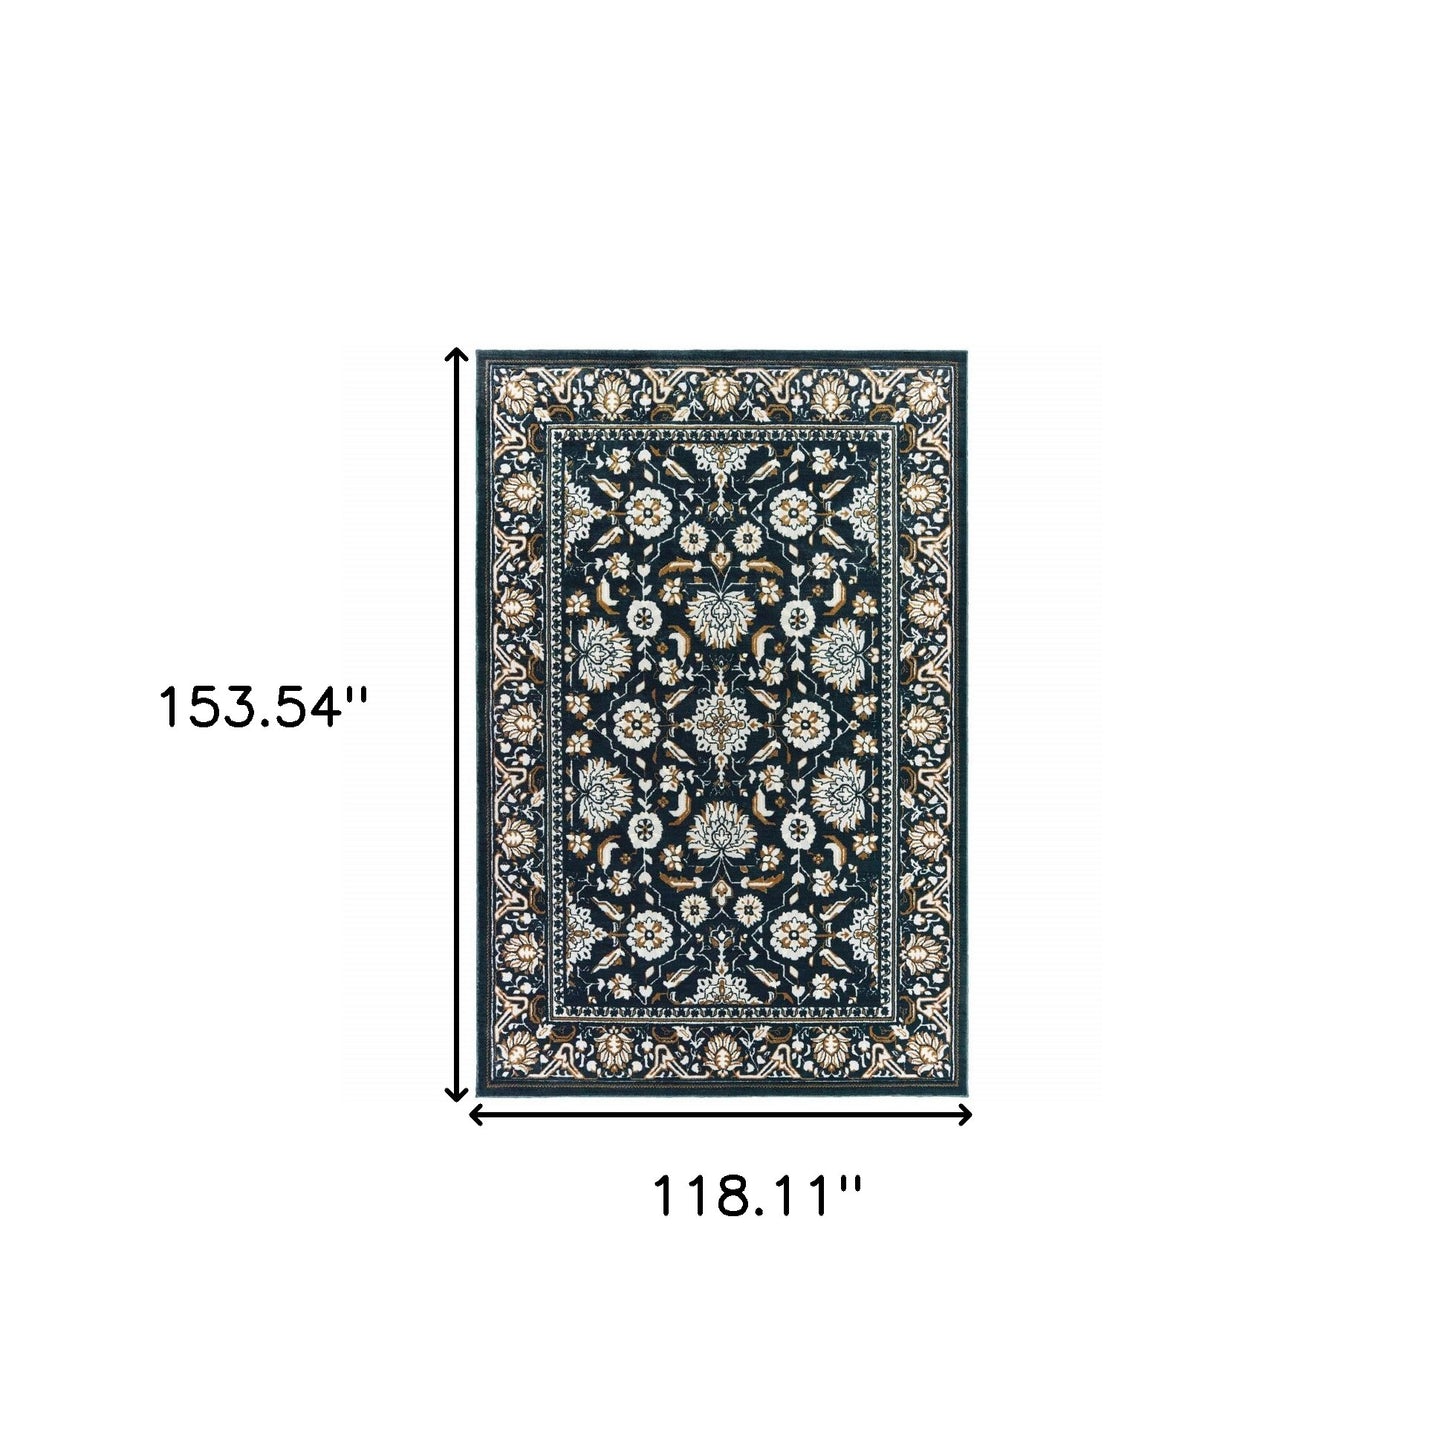 10' X 13' Navy Caramel And Ivory Oriental Power Loom Stain Resistant Area Rug